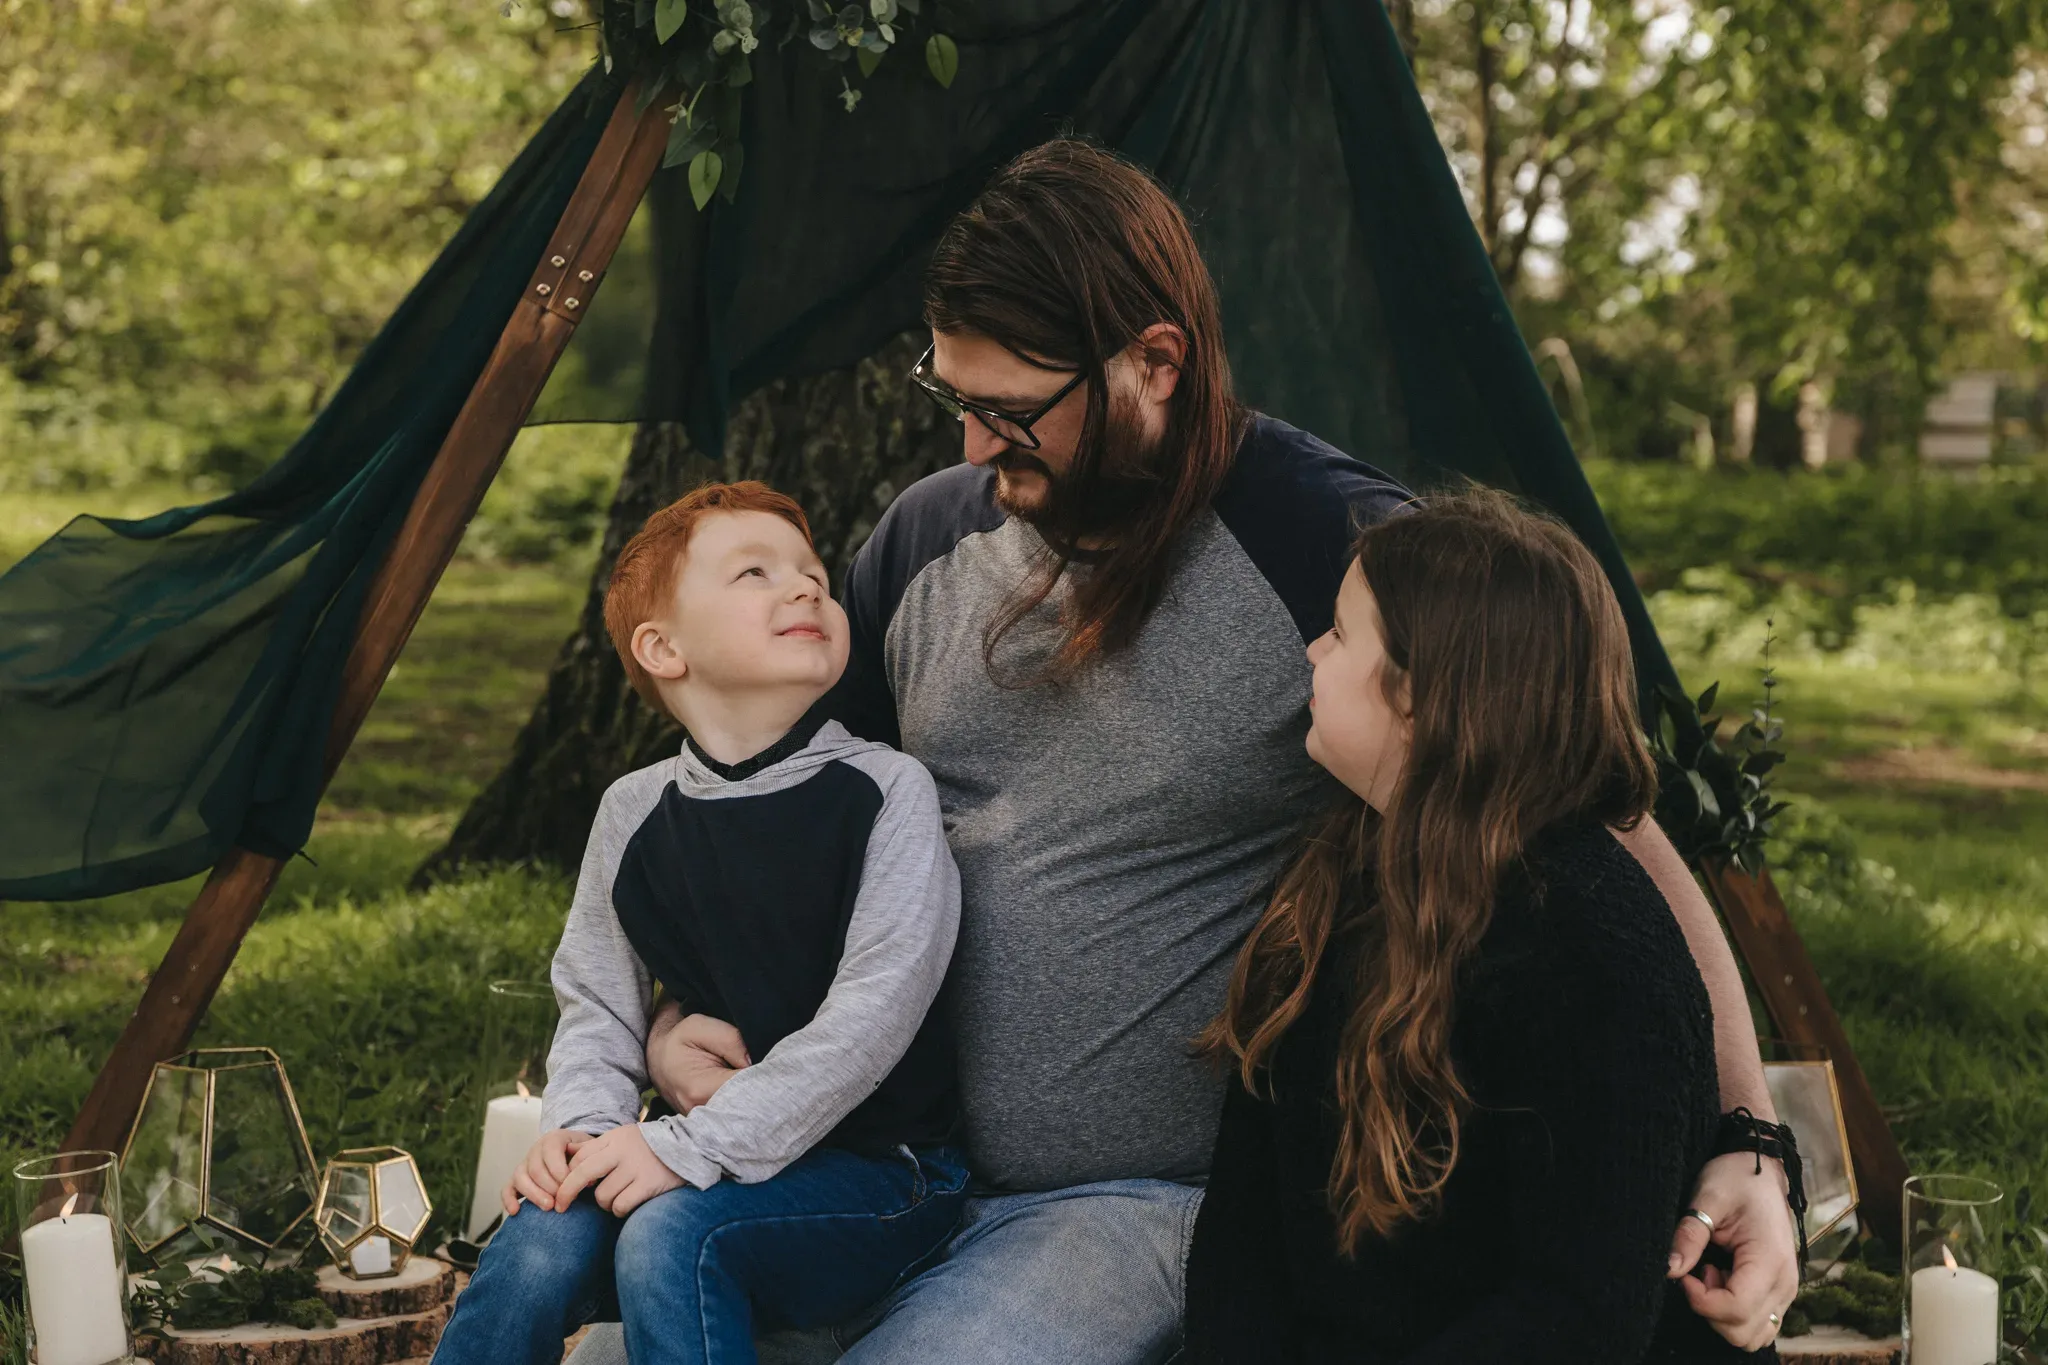 A father with long hair and a beard sits with his son and daughter on a picnic blanket under a tent in a park, sharing a joyful moment. the area is decorated with candles and greenery.